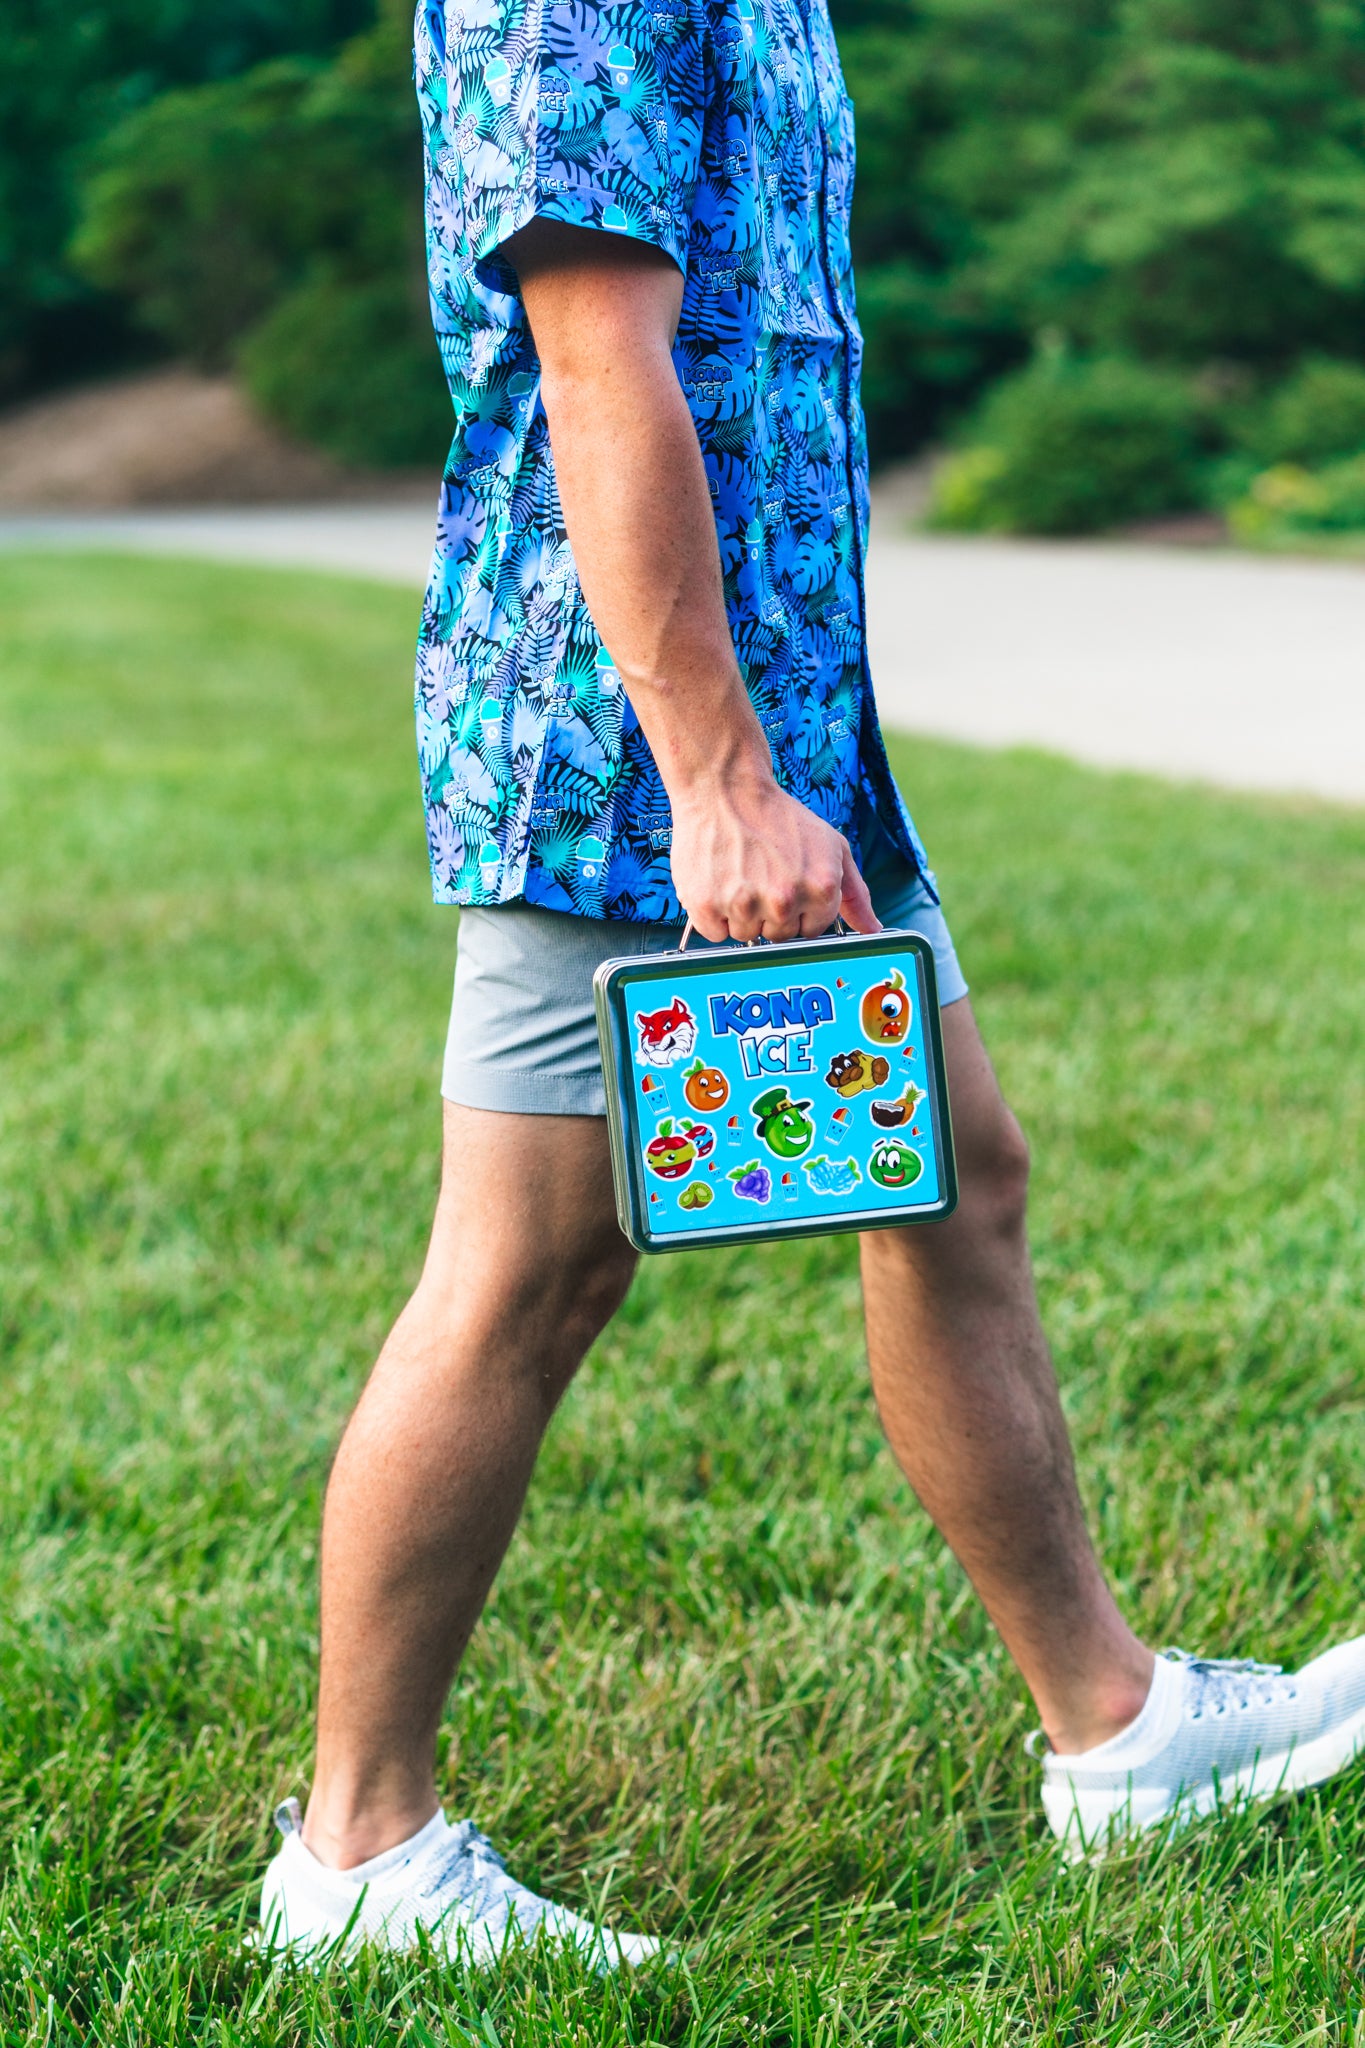 The 10 Very Best Lunch Boxes and Lunch Gear